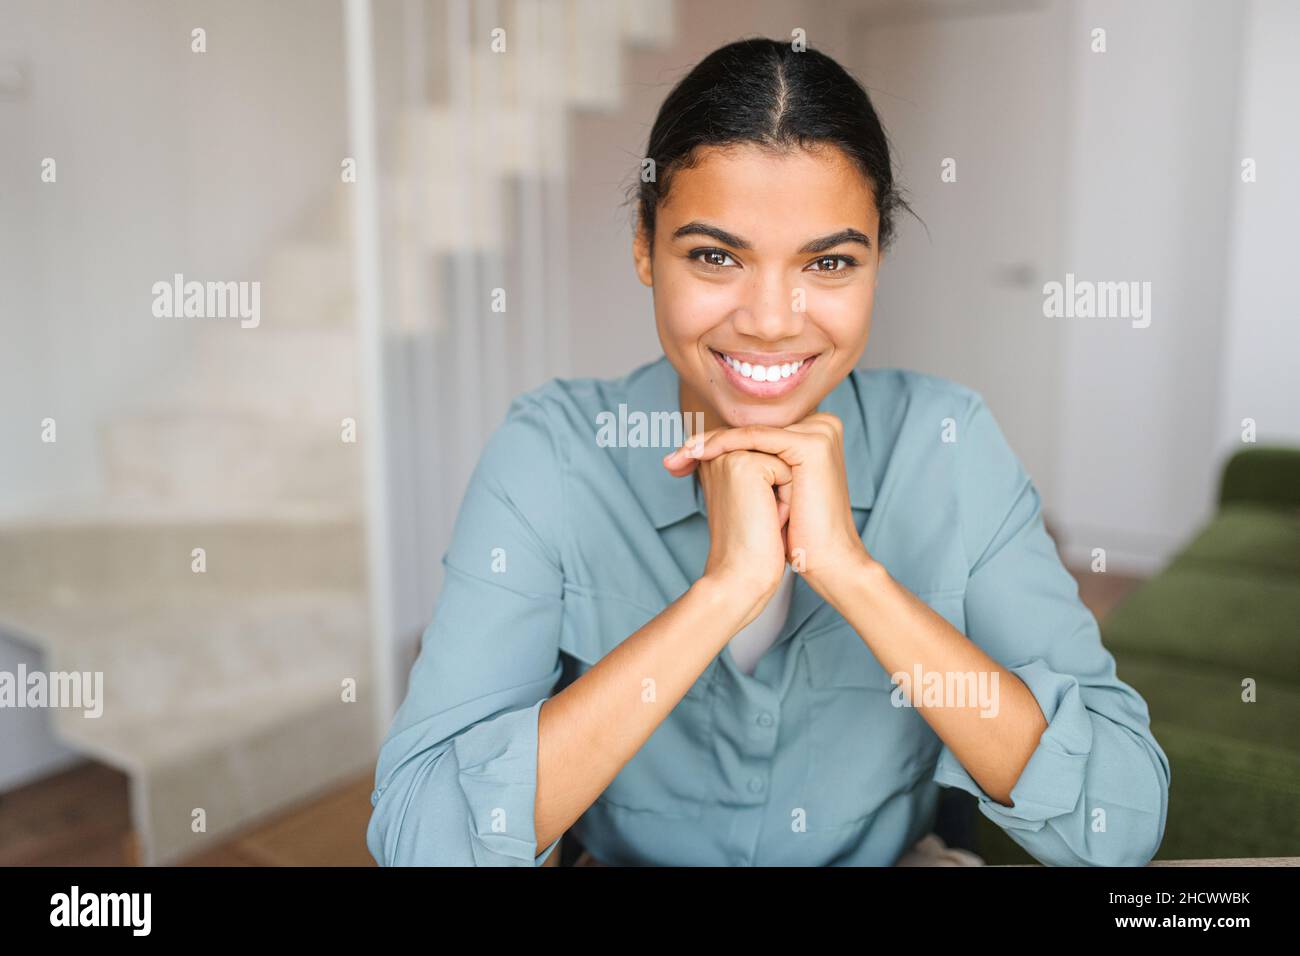 Portrait of charming elegant woman with hands under chin smiling at the camera, sitting in the modern house, wearing jeans shirt Stock Photo